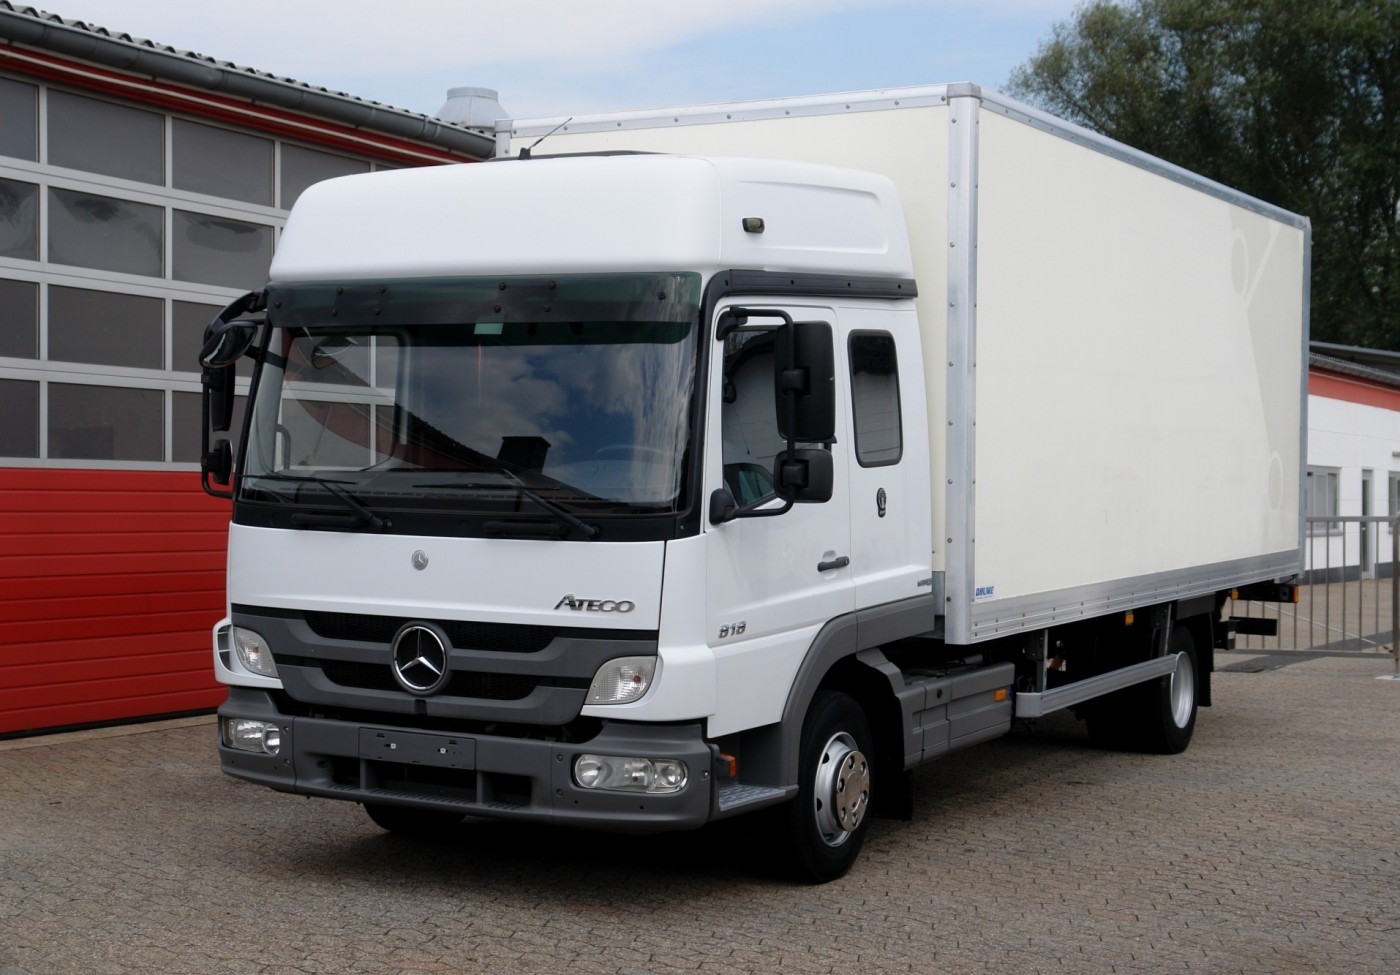 Mercedes-Benz - Atego 818 RL closed box 6,20m long cabin airco manual gearbox air suspension liftgate 1500kg EURO5 TÜV new!